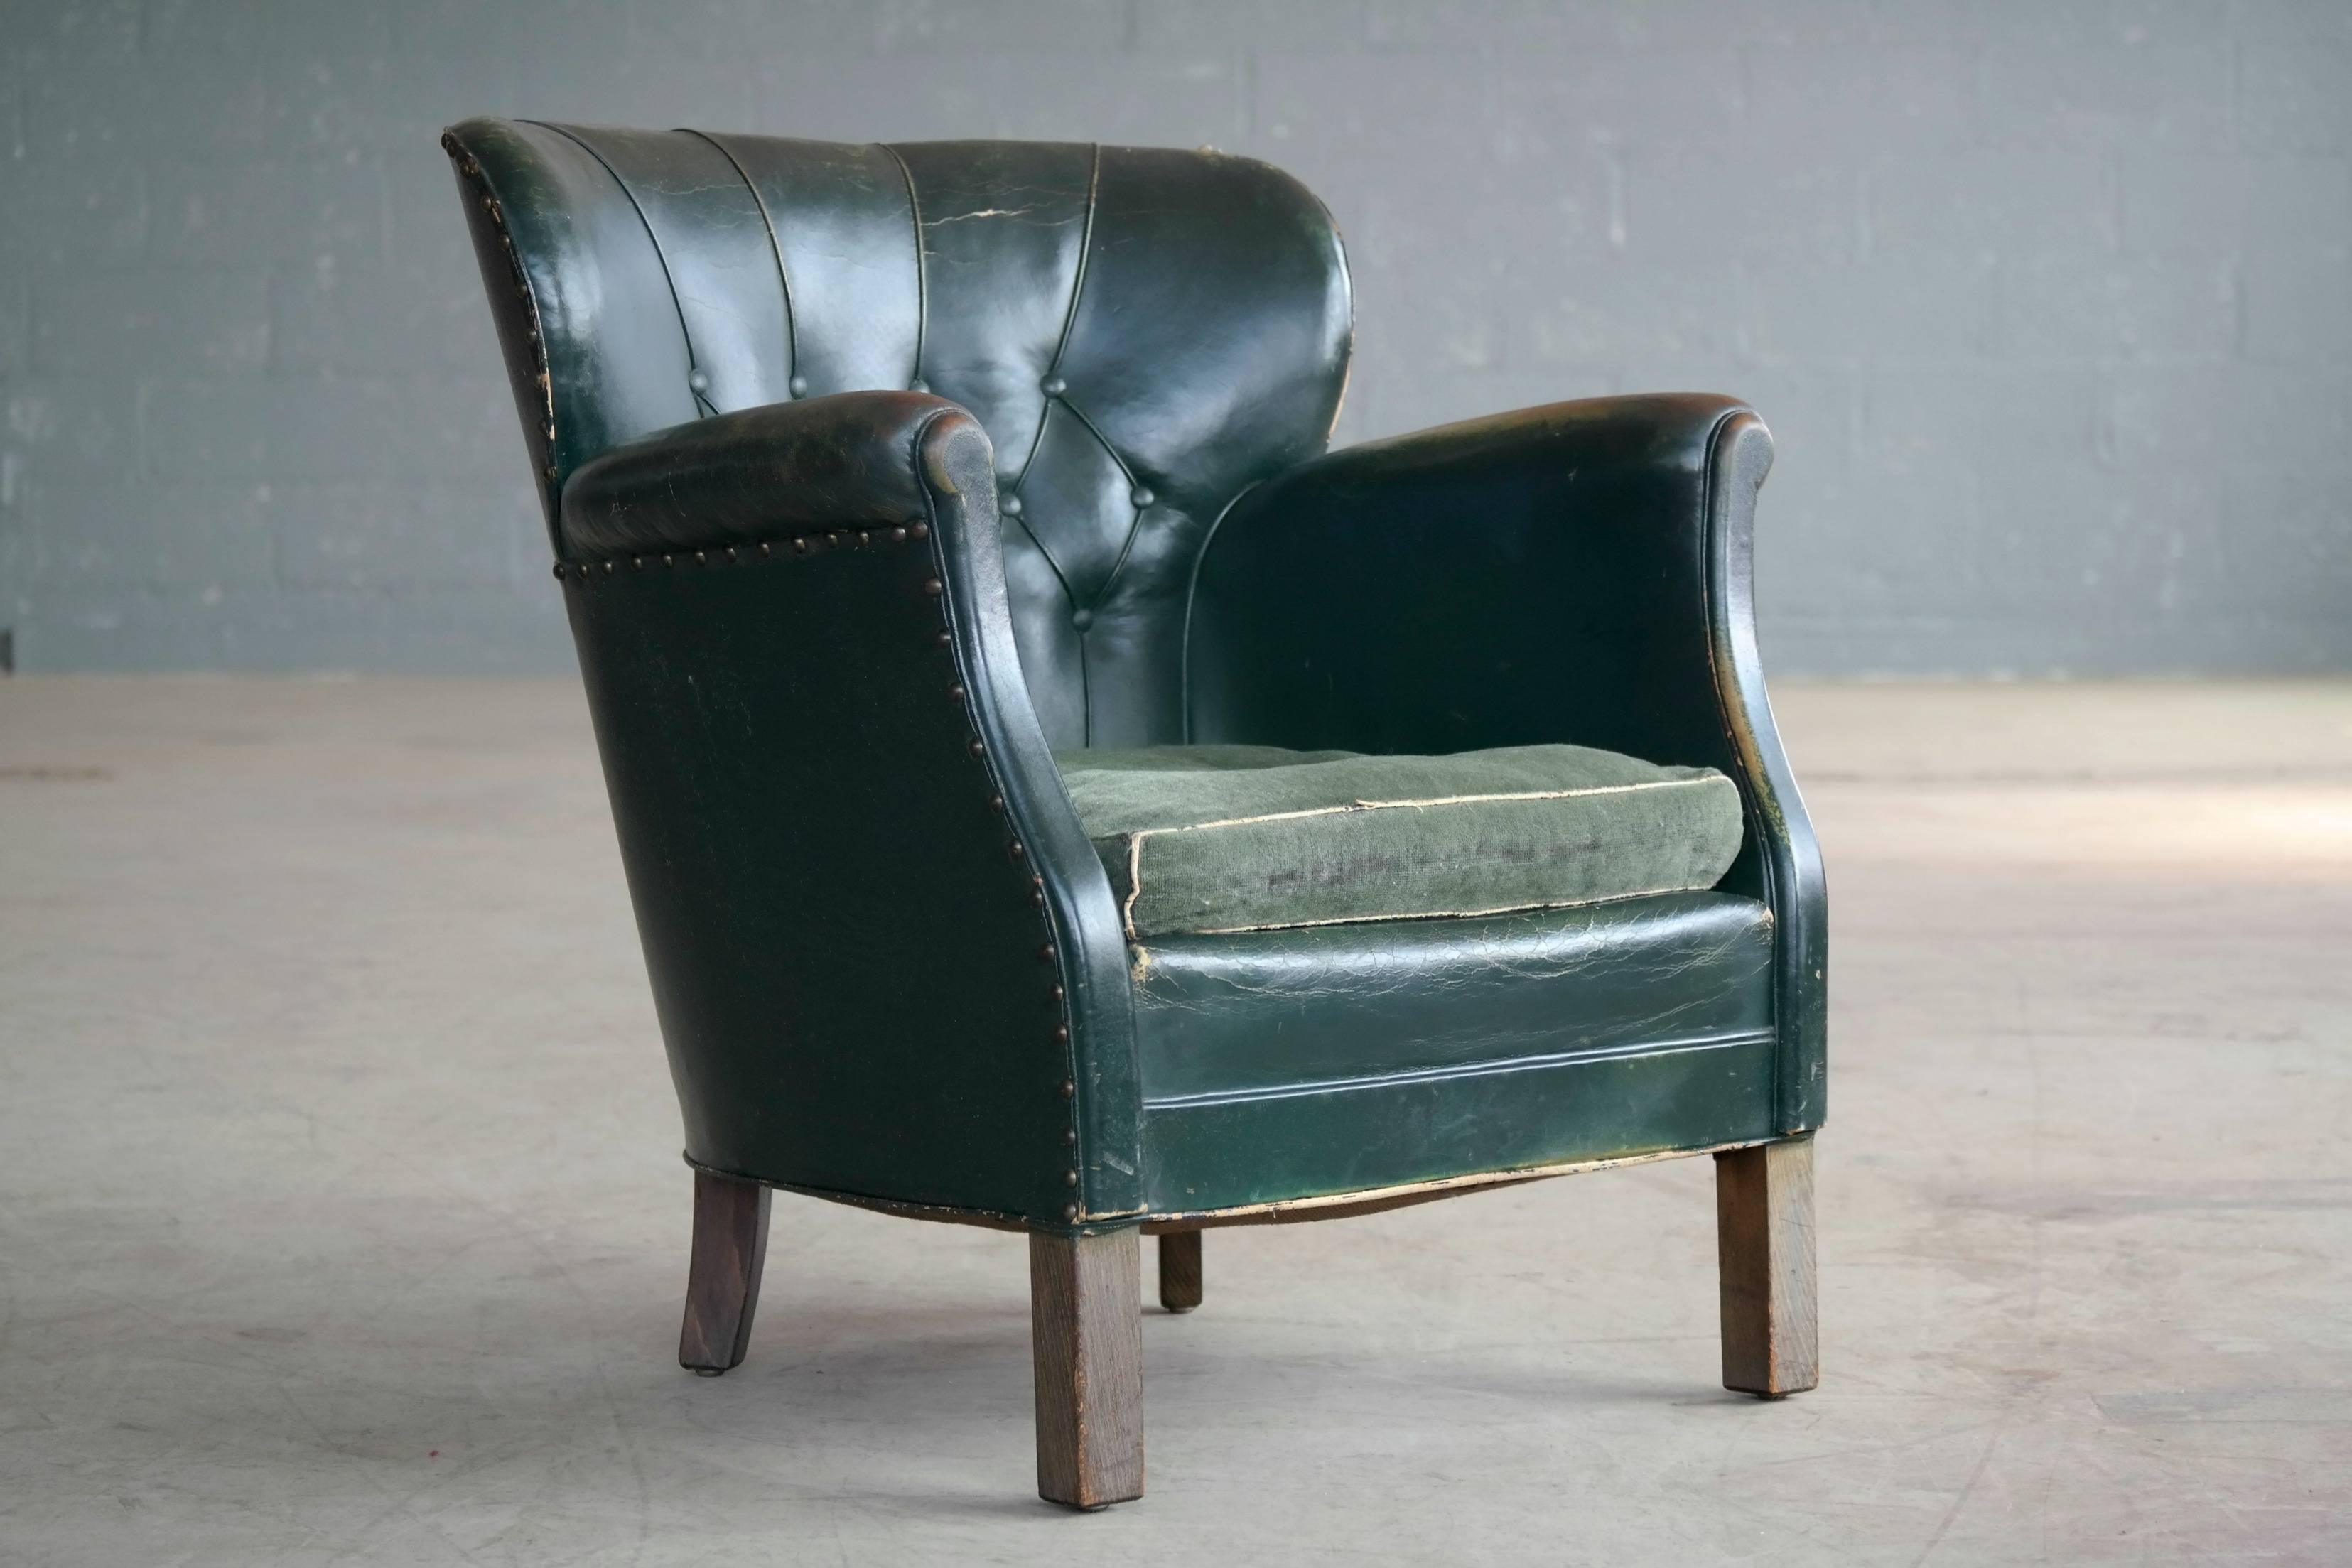 A Classic Danish small-scale club chair from the post Art Deco period of the late 1930s. Fantastic patinated original green leather with a buttoned back and brass tacks. Later added green velvet cushion. Noble patina and wear to especially the